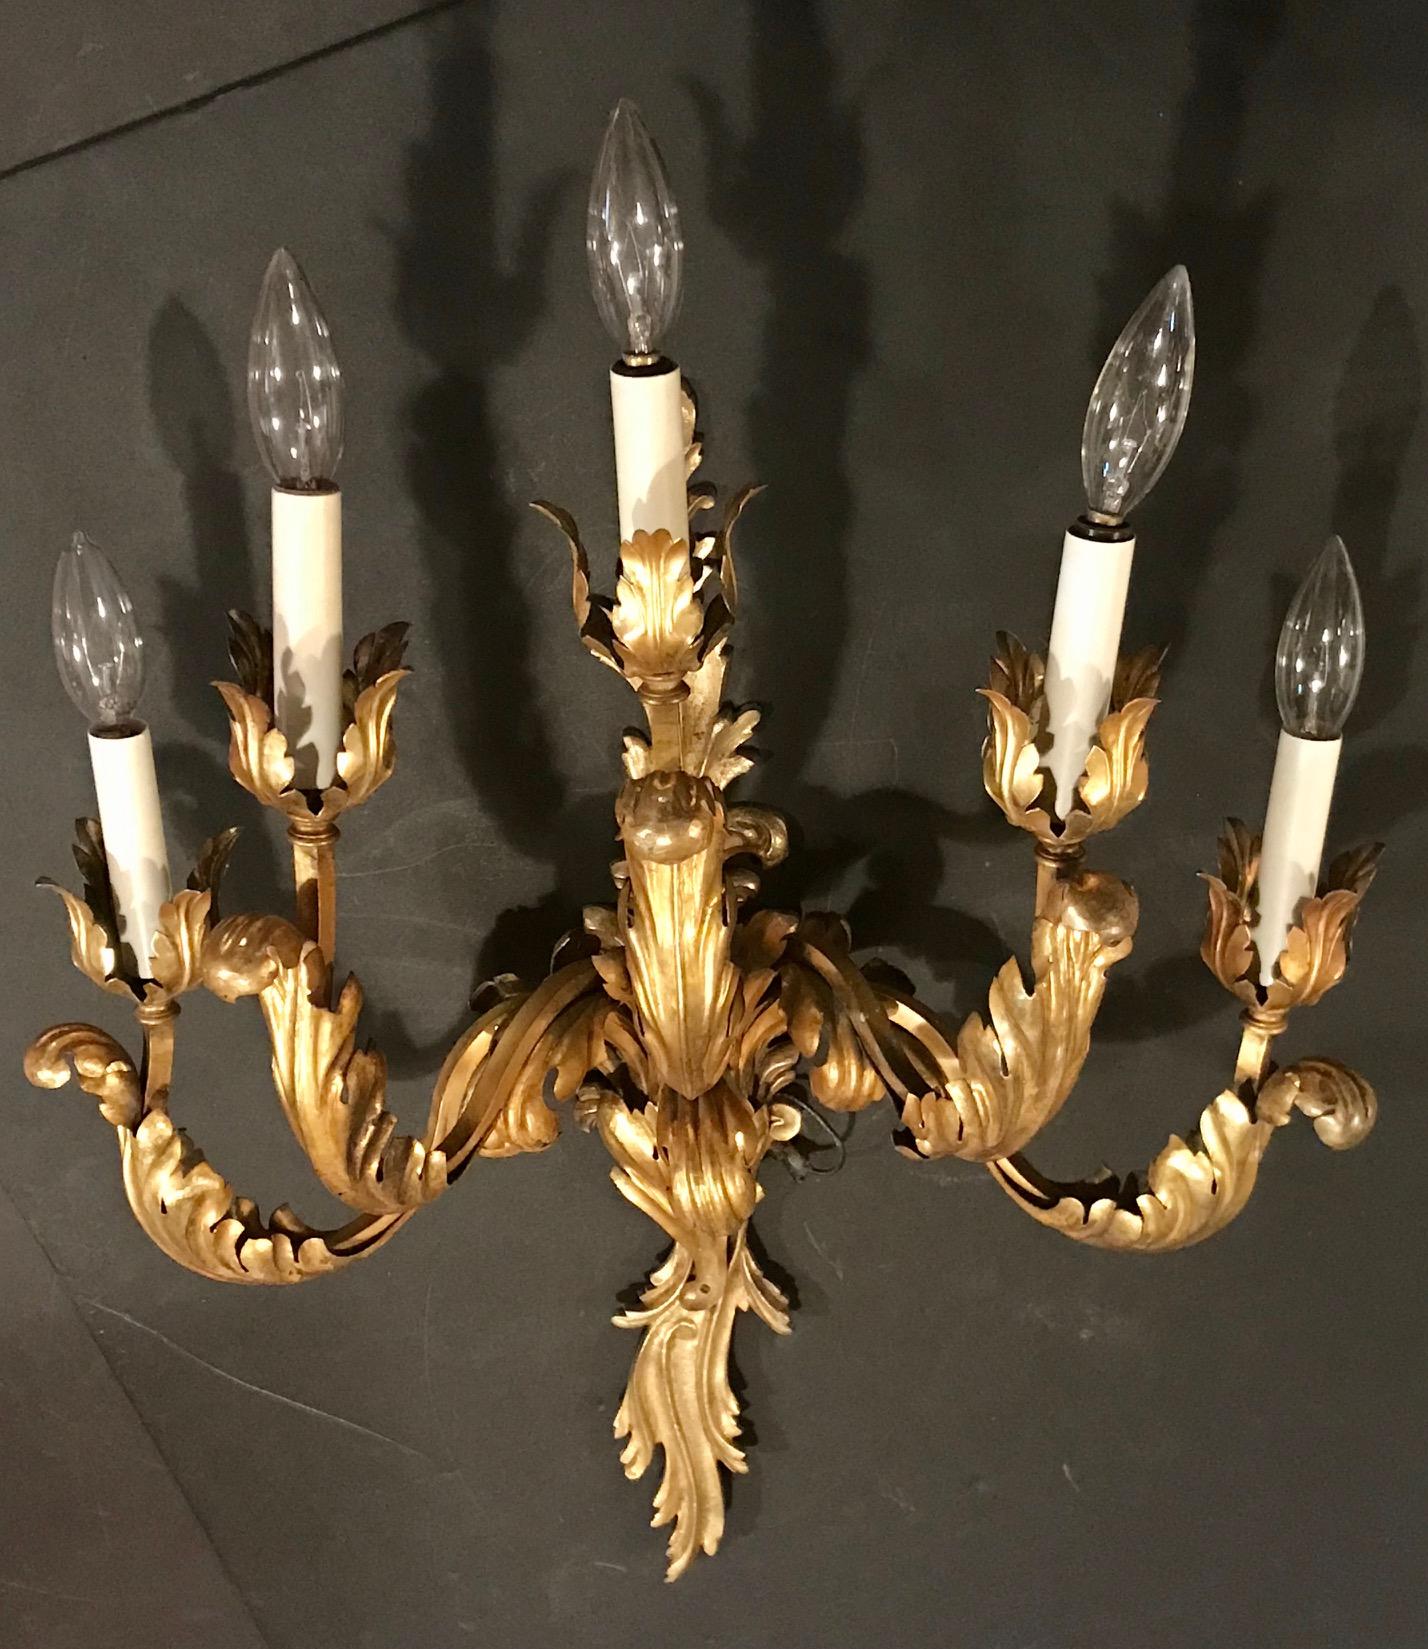 This large, electrified five-arm sconce is decoratively designed in glowing gilt bronze and metal acanthus leaves in the Louis XV style. 

The condition is very good, Lights are in working condition and the gilt is strong. The sconce is ready to